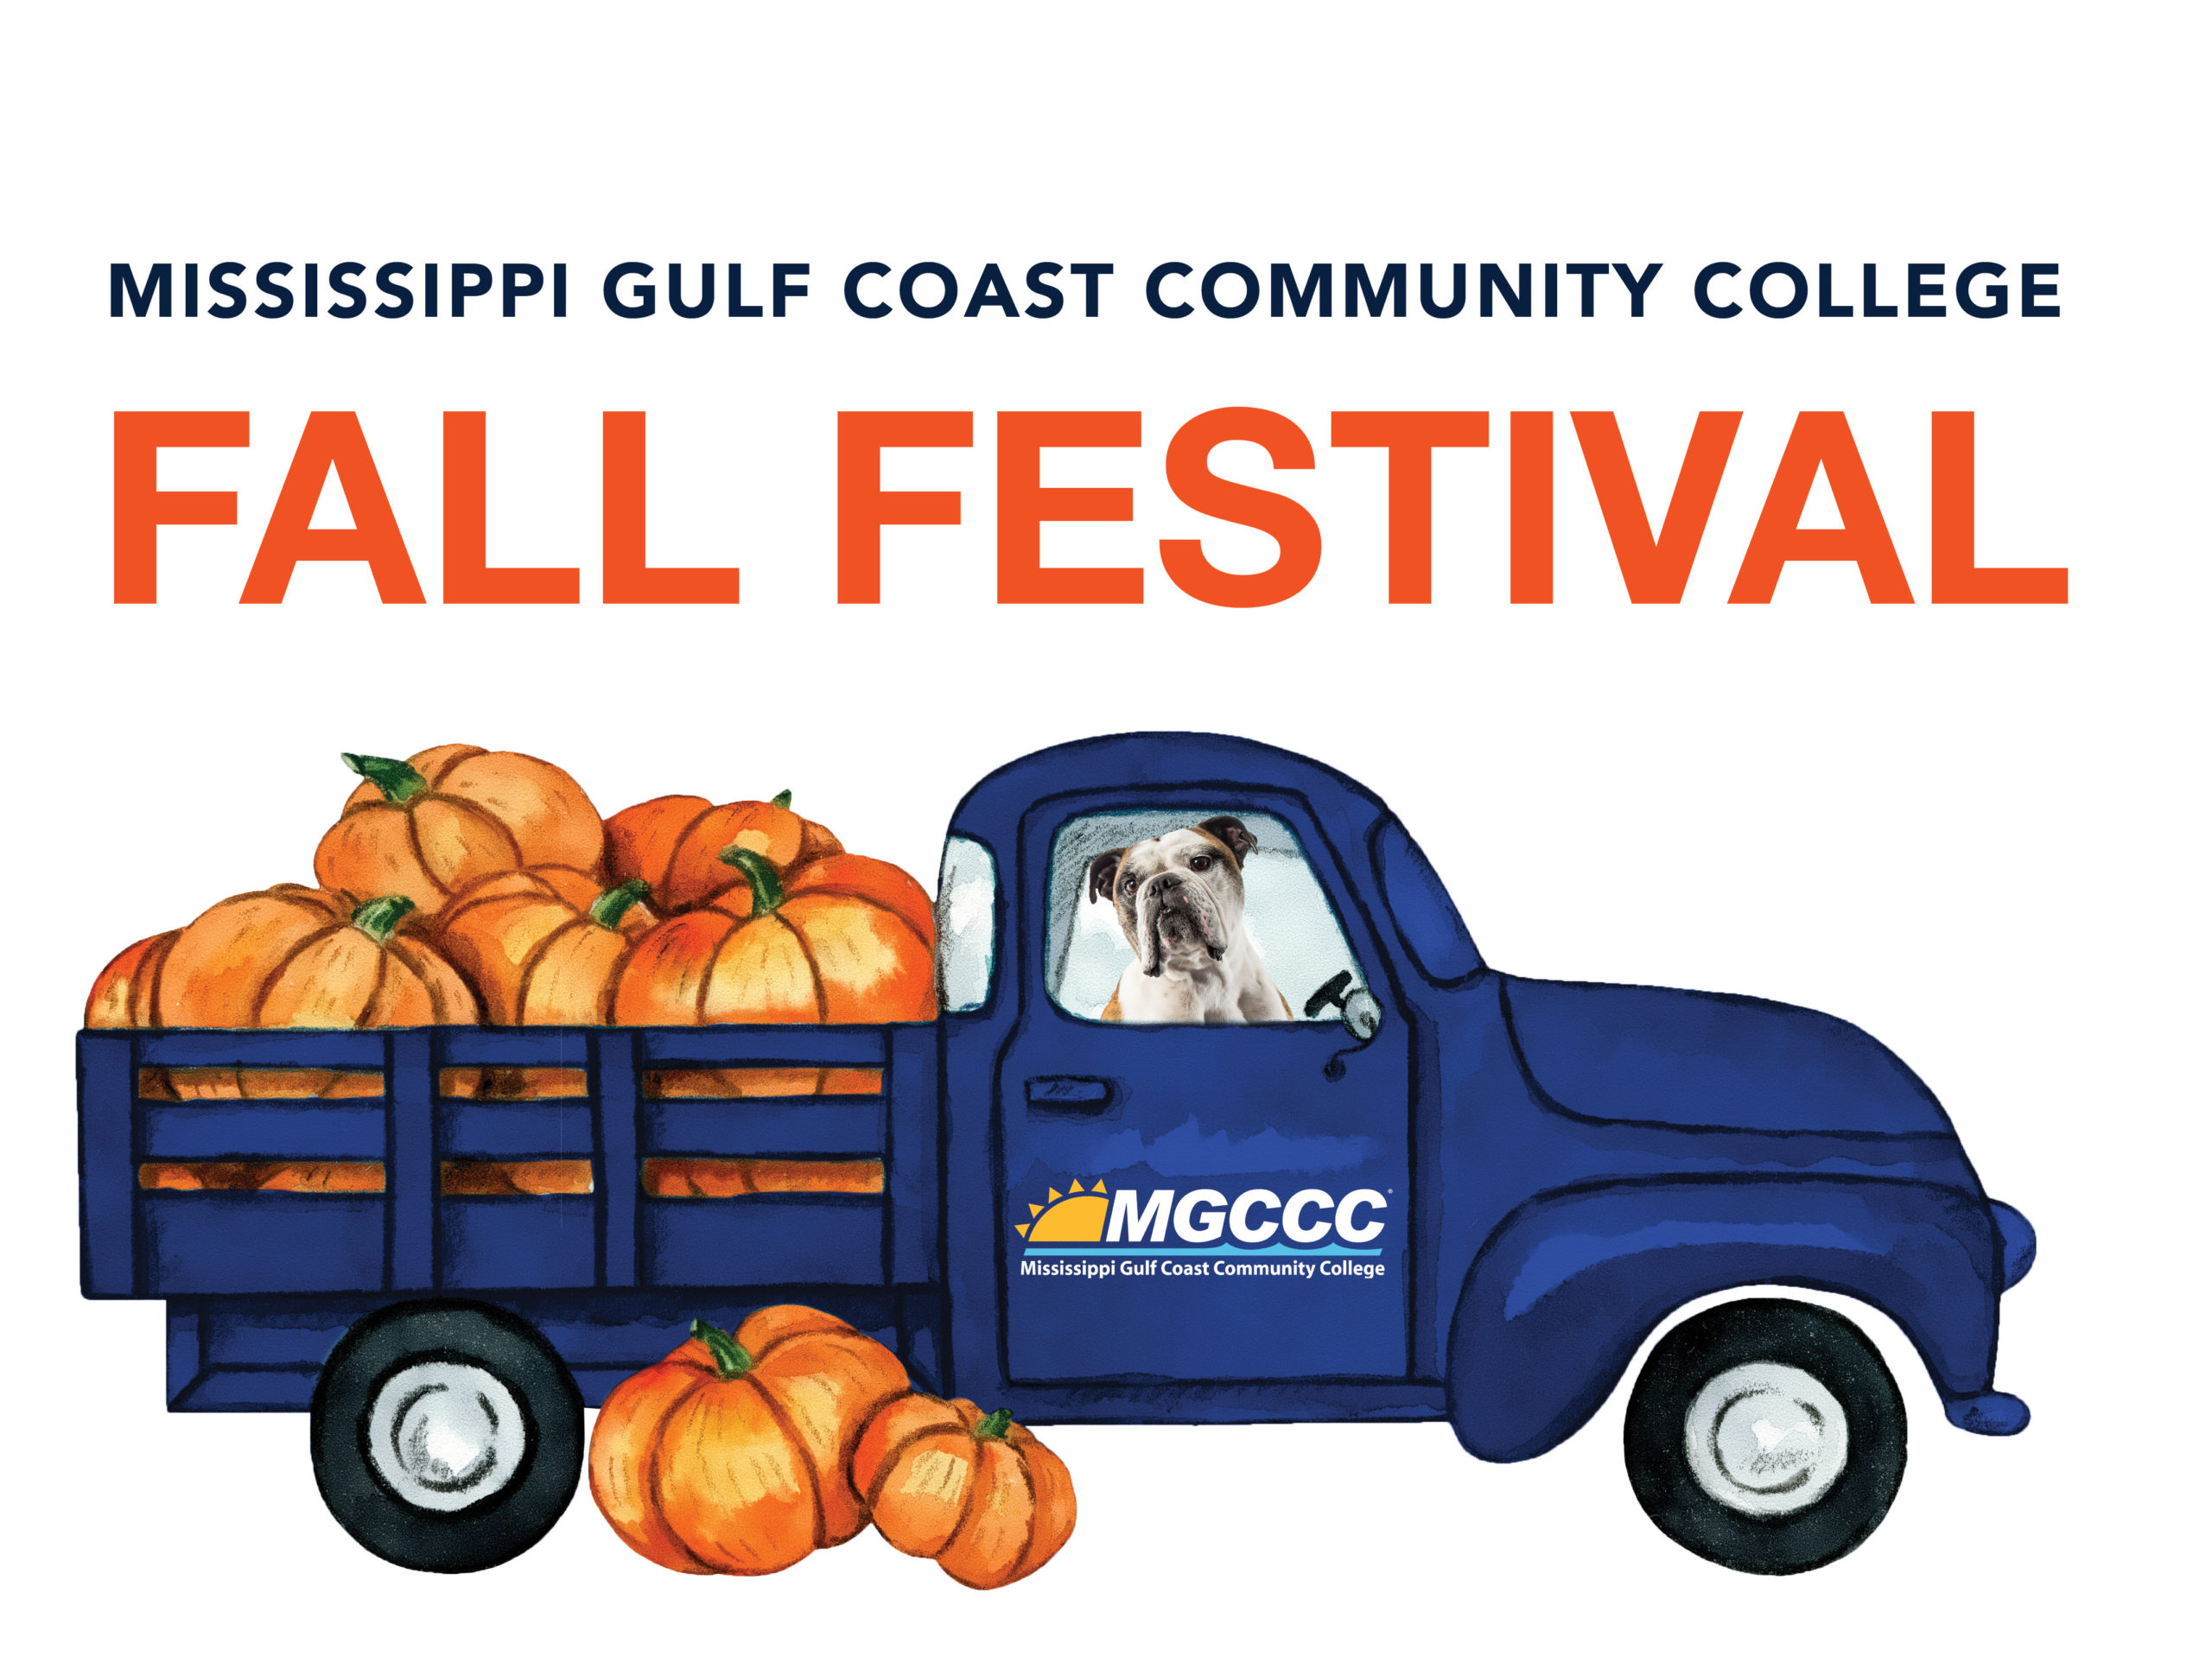 MGCCC Coast campuses offer fall festivals for families and MGCCC students